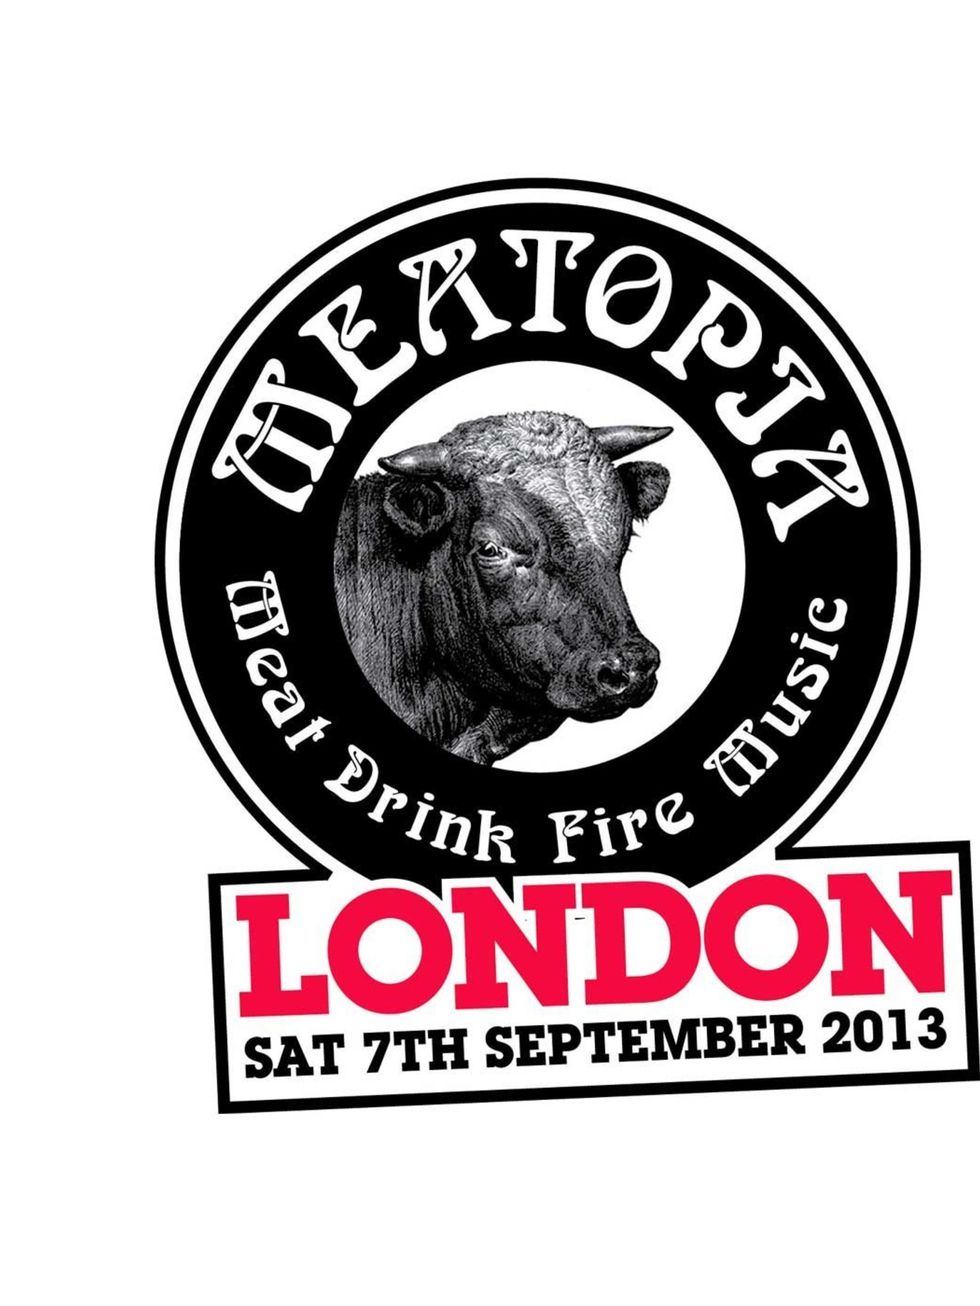 <p><strong>Meatopia comes to London</strong></p><p>Hurrah! The biggest festival of Meat and BBQ in New York, San Francisco and Texas, is coming to London. Ready yourselves meat lovers, top chefs will be smoking, grilling and BBQing locally sourced meat fo